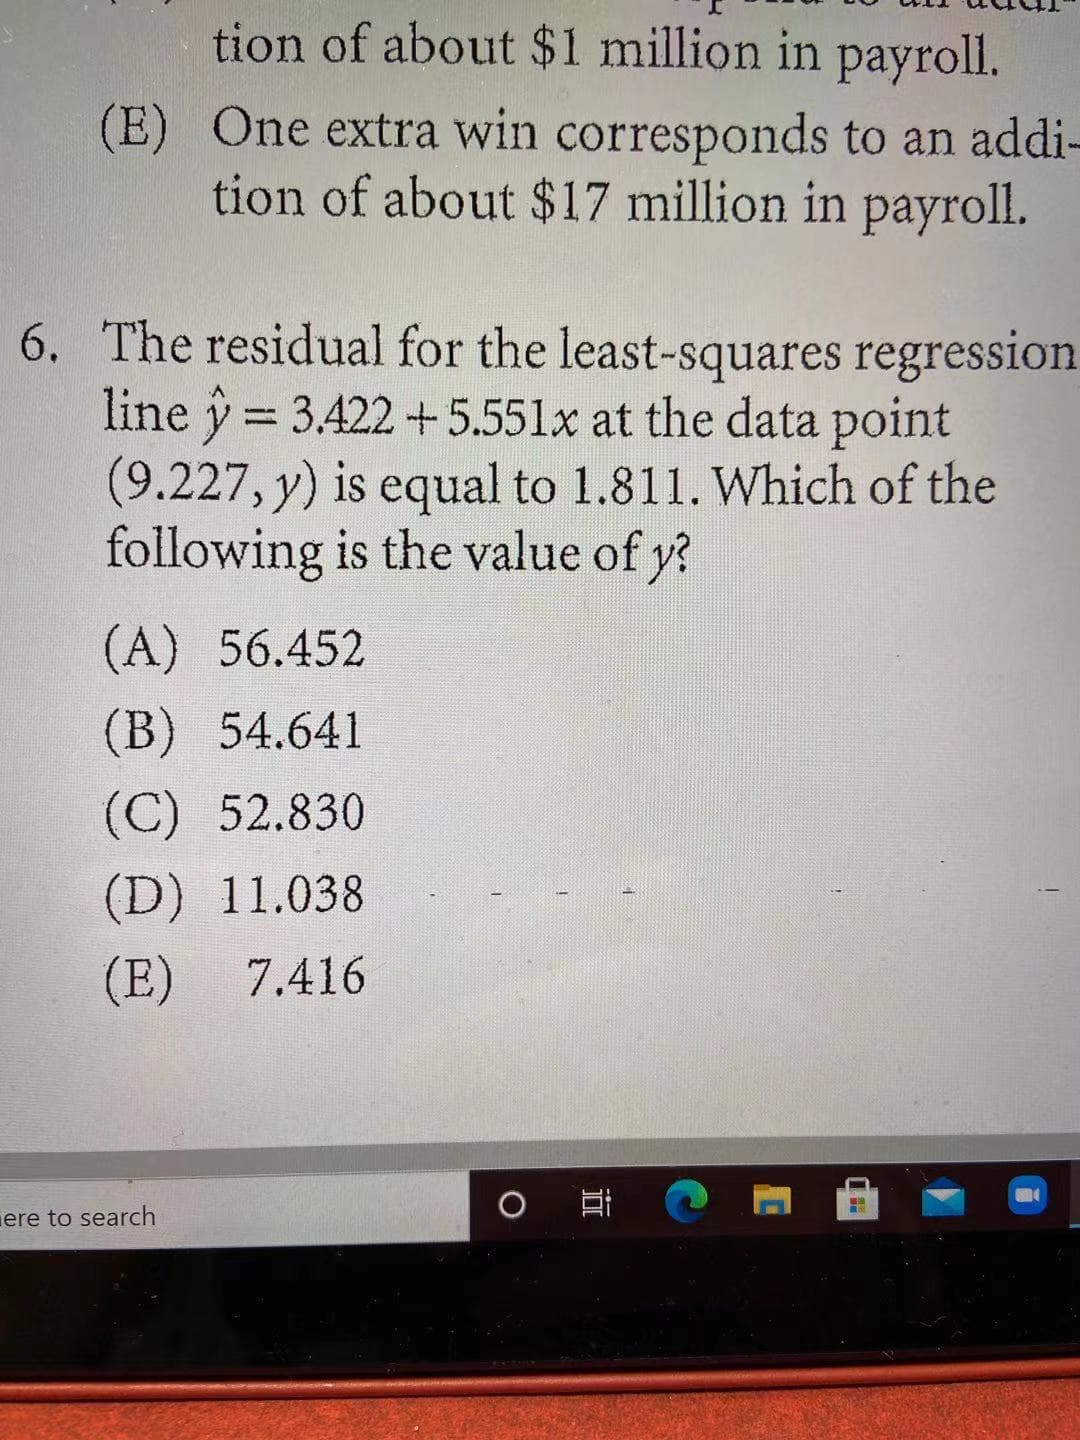 tion of about $1 million in payroll.
(E) One extra win corresponds to an addi-
tion of about $17 million in payroll.
6. The residual for the least-squares regression
line y = 3.422 +5.551x at the data point
(9.227, y) is equal to 1.811. Which of the
following is the value of y?
(A) 56.452
(B) 54.641
(C) 52.830
(D) 11.038
(E) 7.416
ere to search
